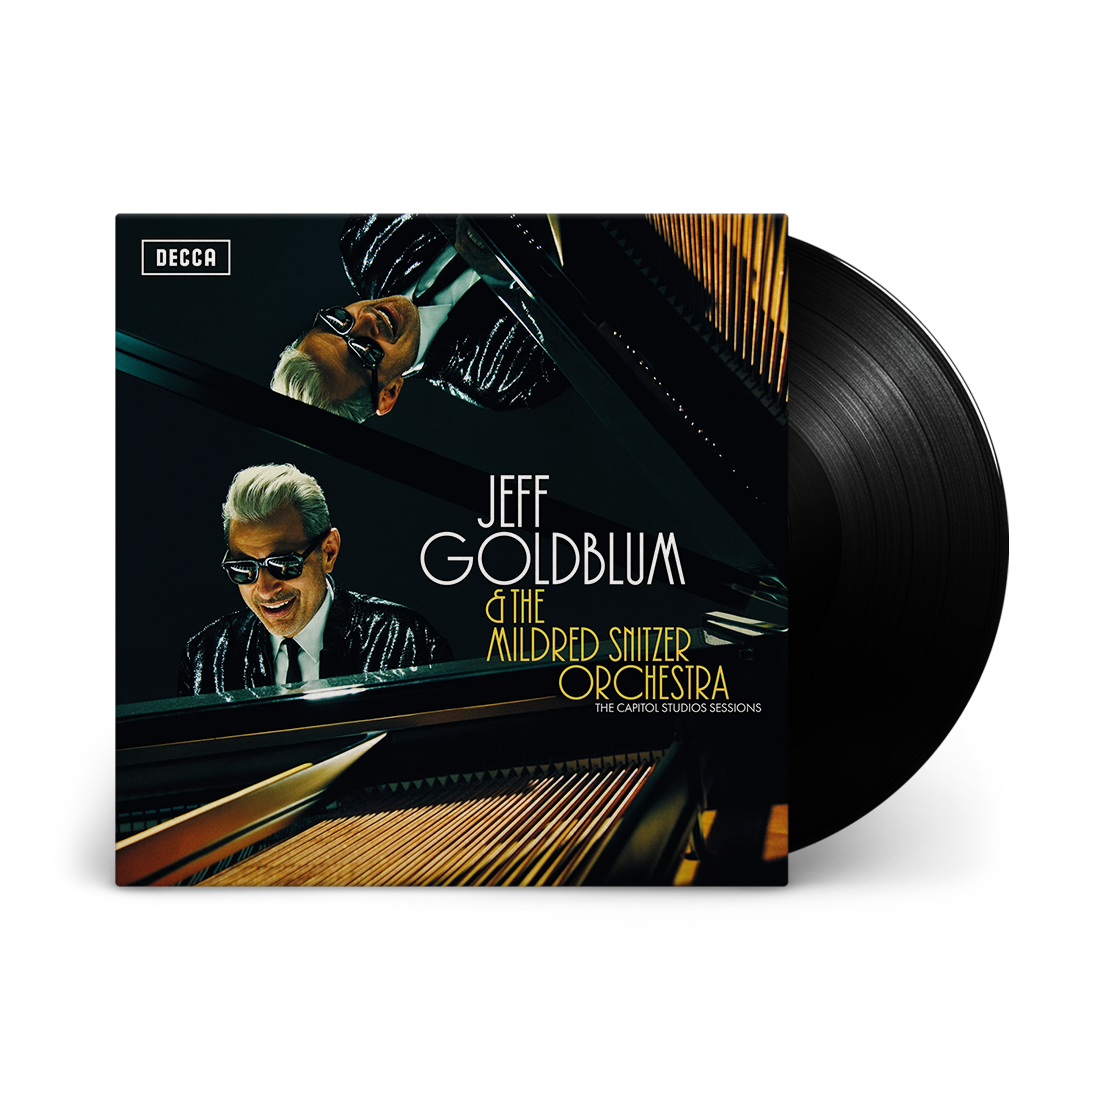 Jeff Goldblum And The Mildred Snitzer Orchestra - The Capitol Studios Sessions: Vinyl LP